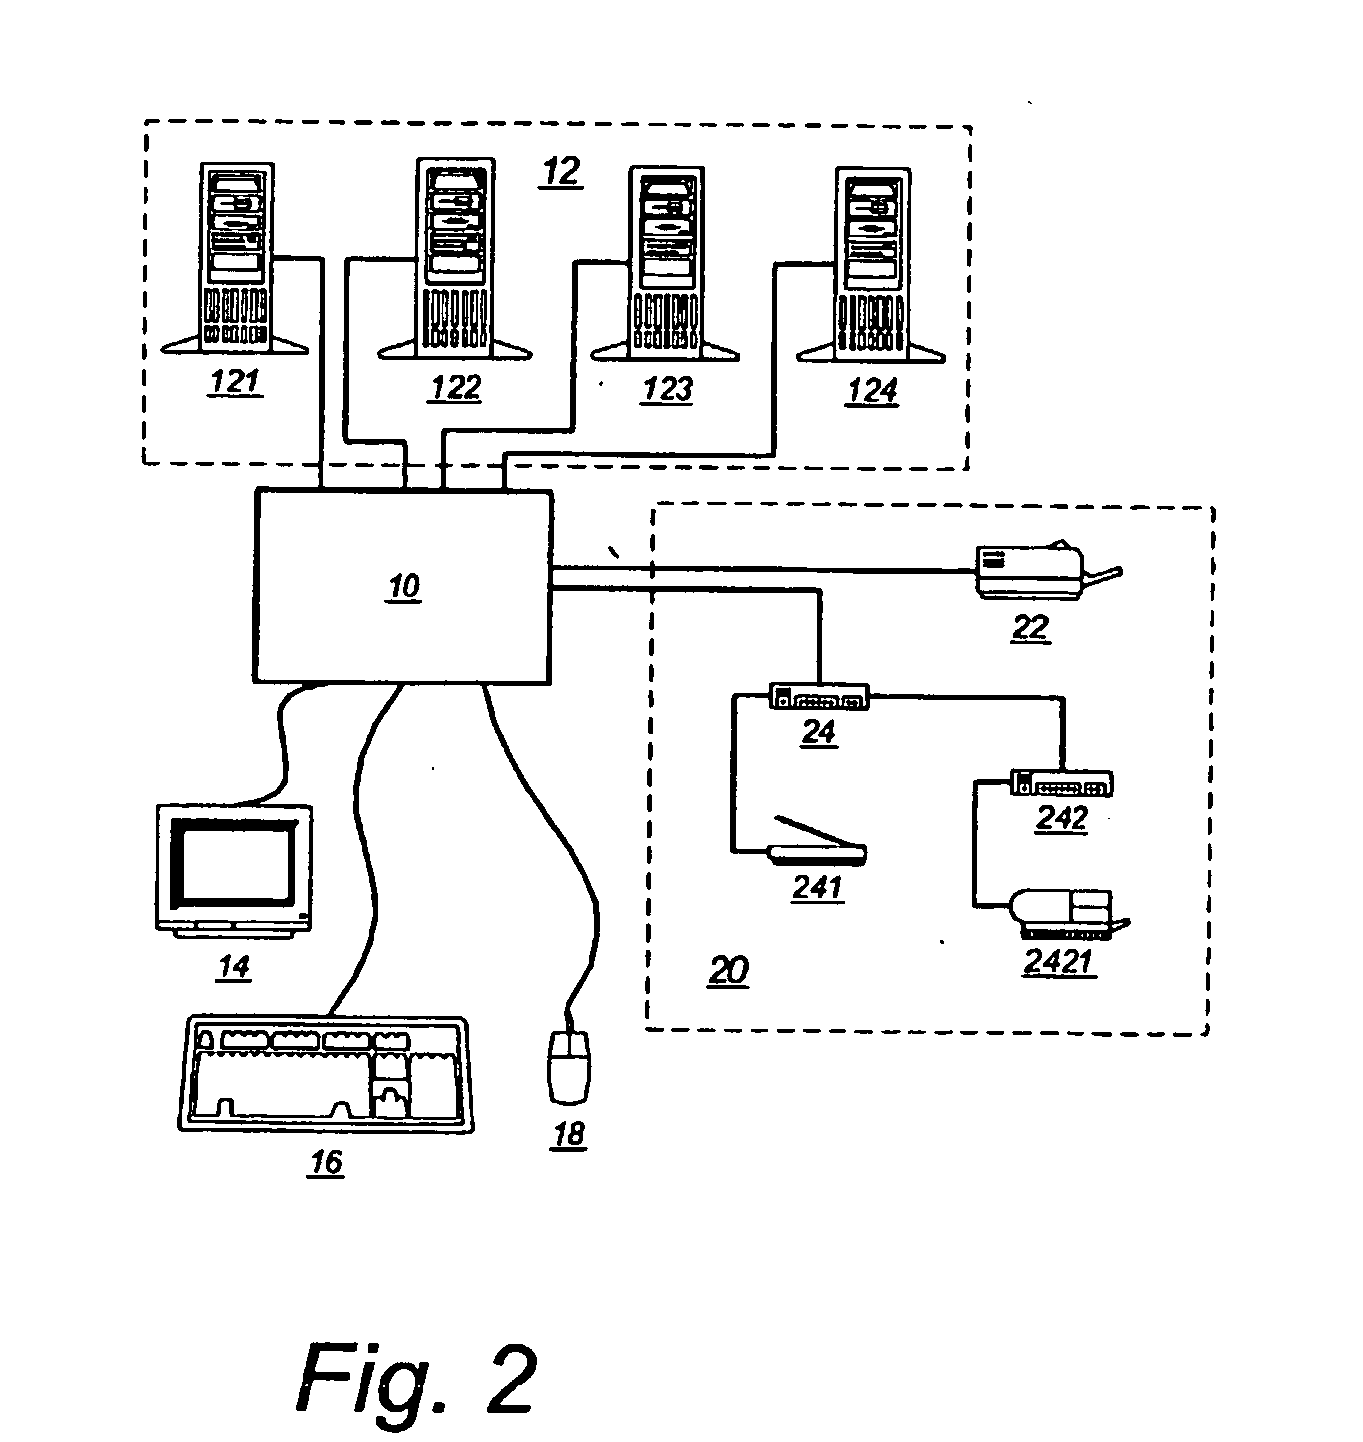 Asynchronous/synchronous KVMP switch for console and peripheral devices